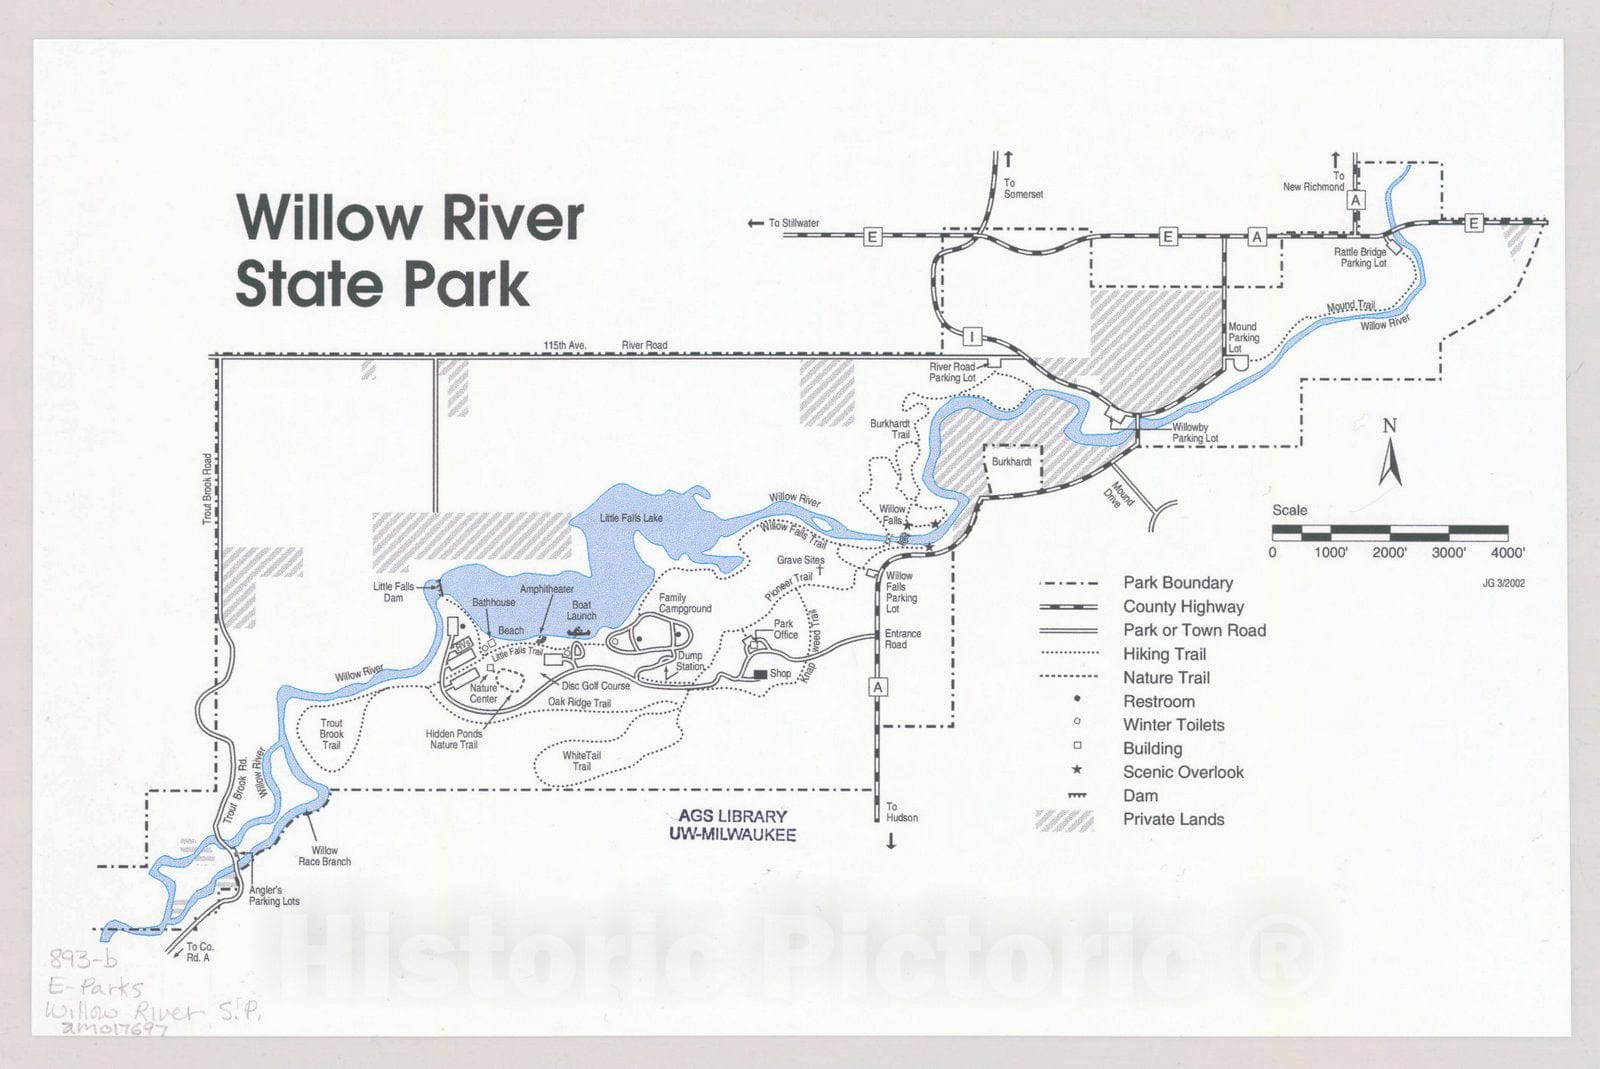 Map : Willow River State Park, Wisconsin , [Wisconsin state parks , forests, recreation areas & trails maps], Antique Vintage Reproduction